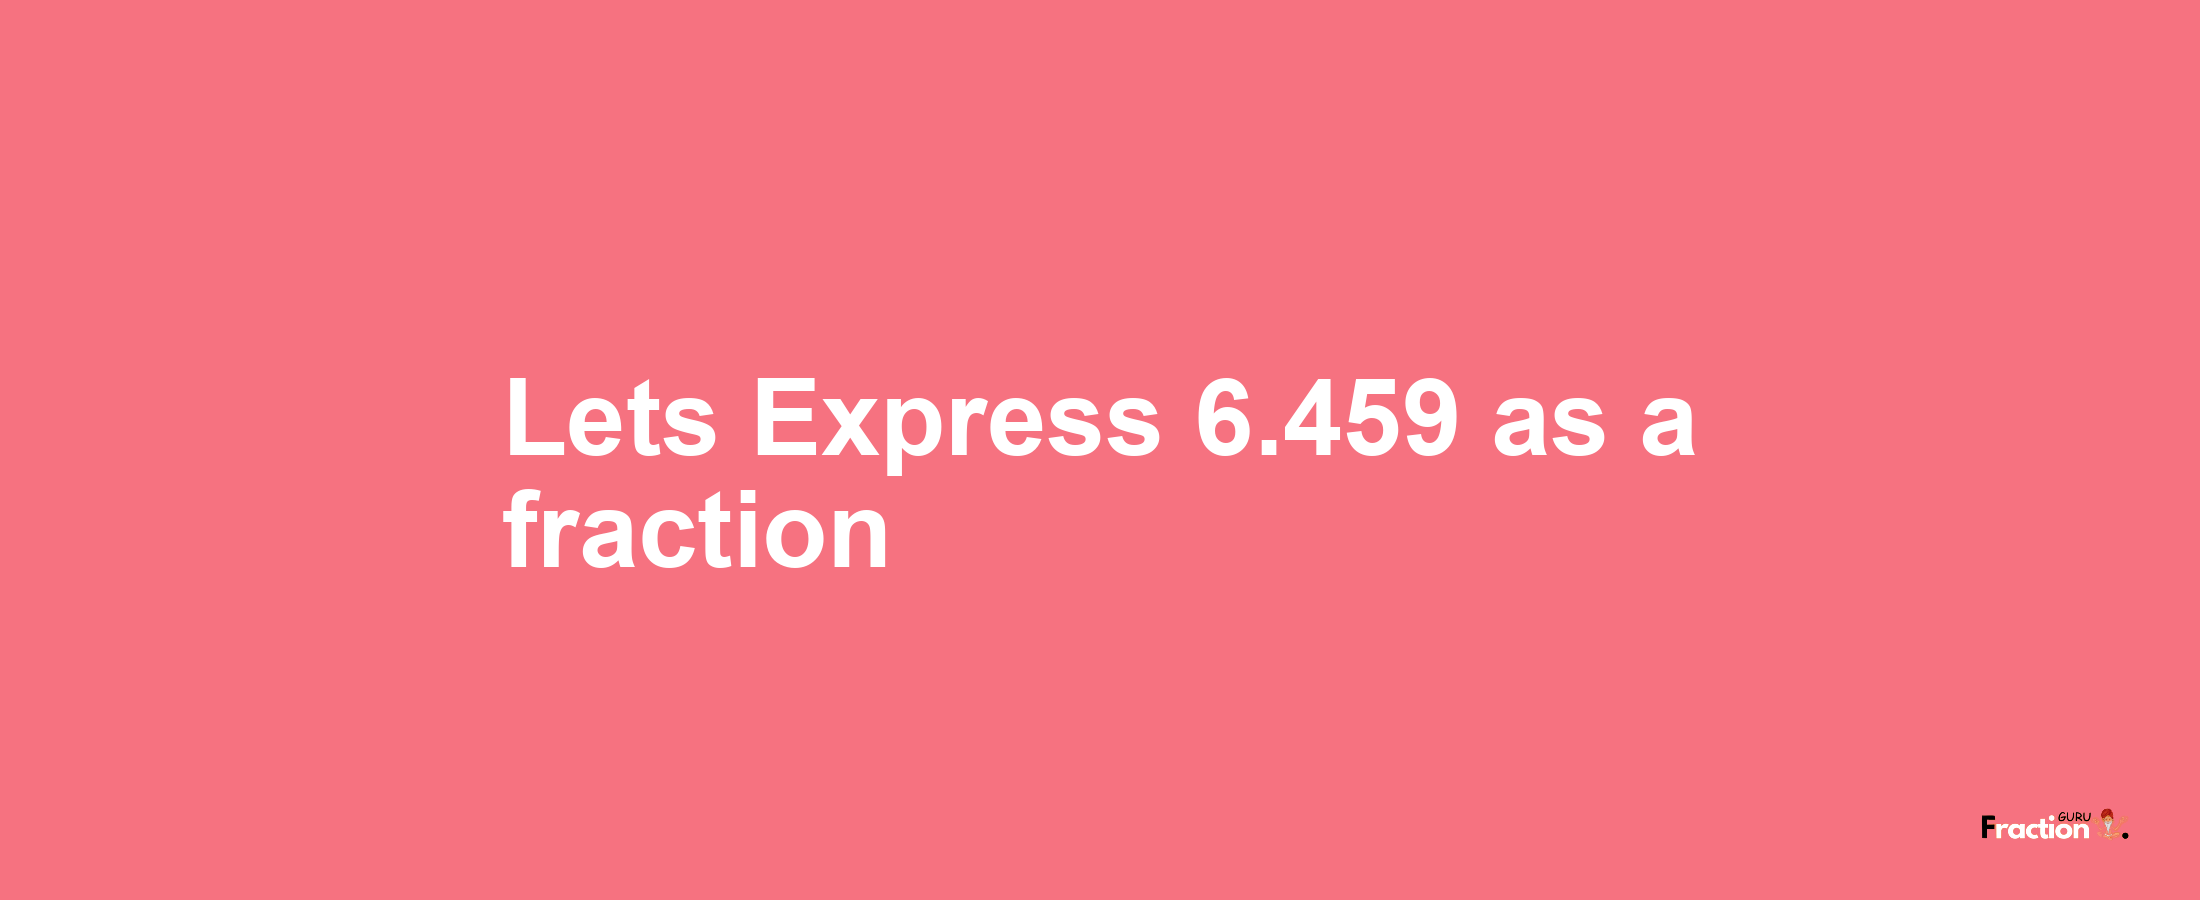 Lets Express 6.459 as afraction